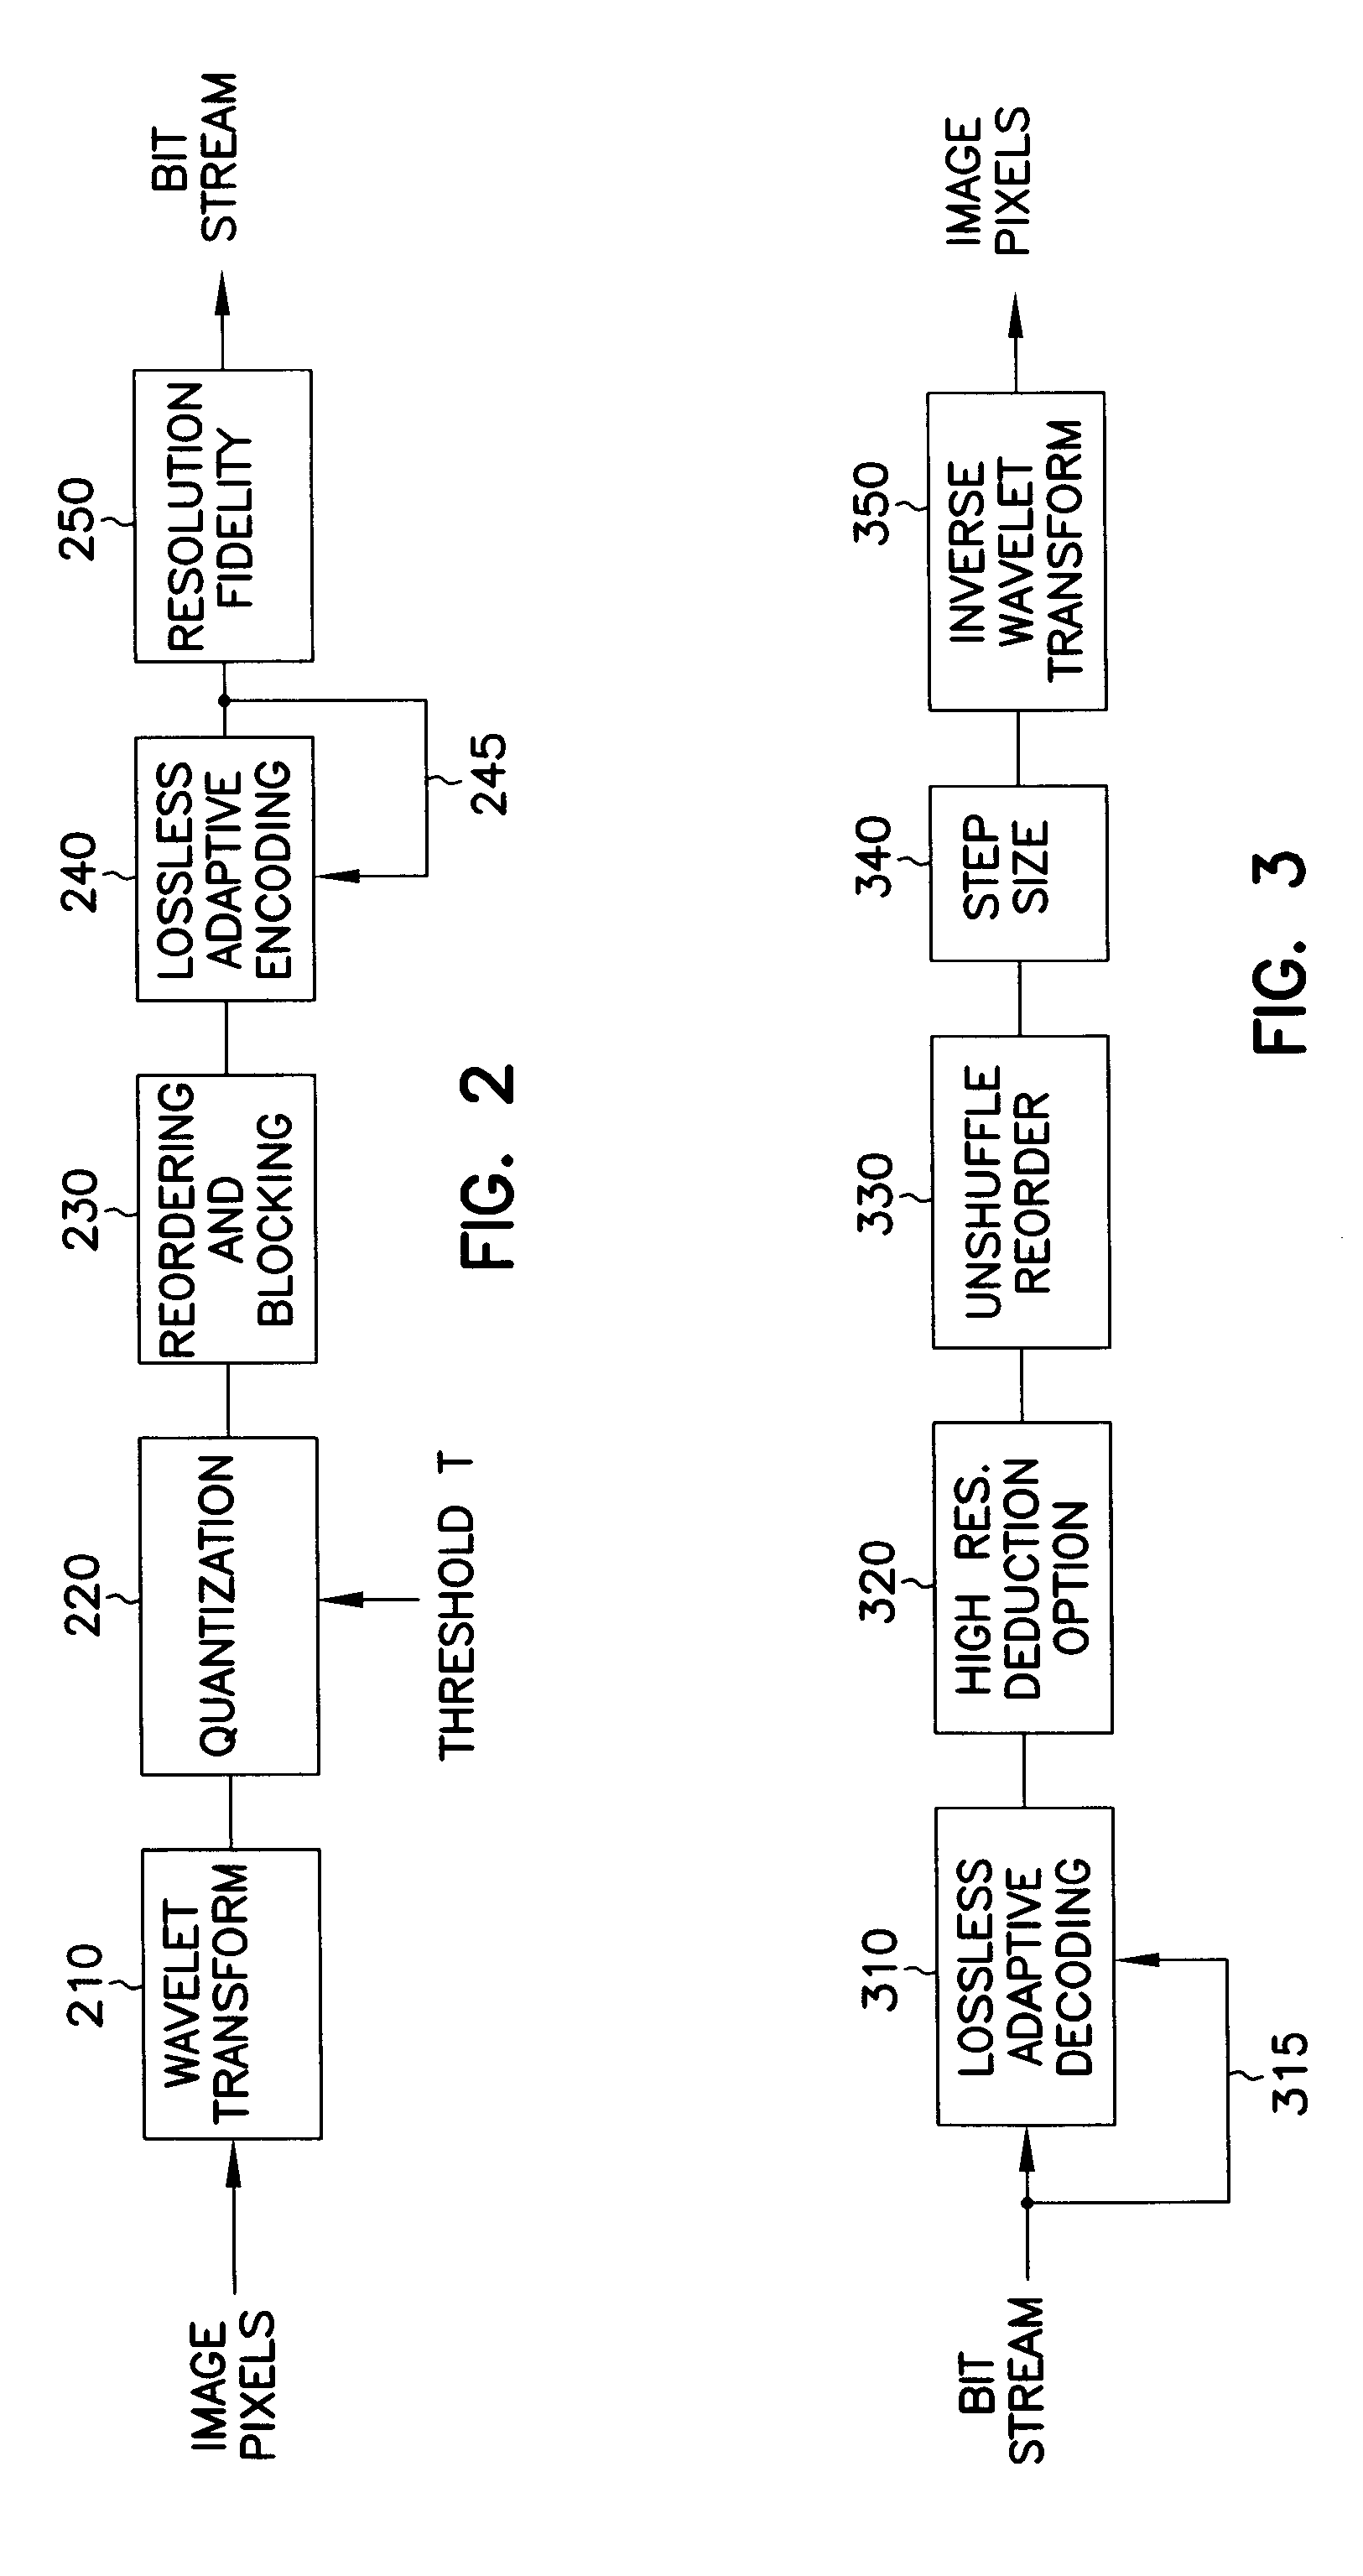 Image encoding using reordering and blocking of wavelet coefficients combined with adaptive encoding